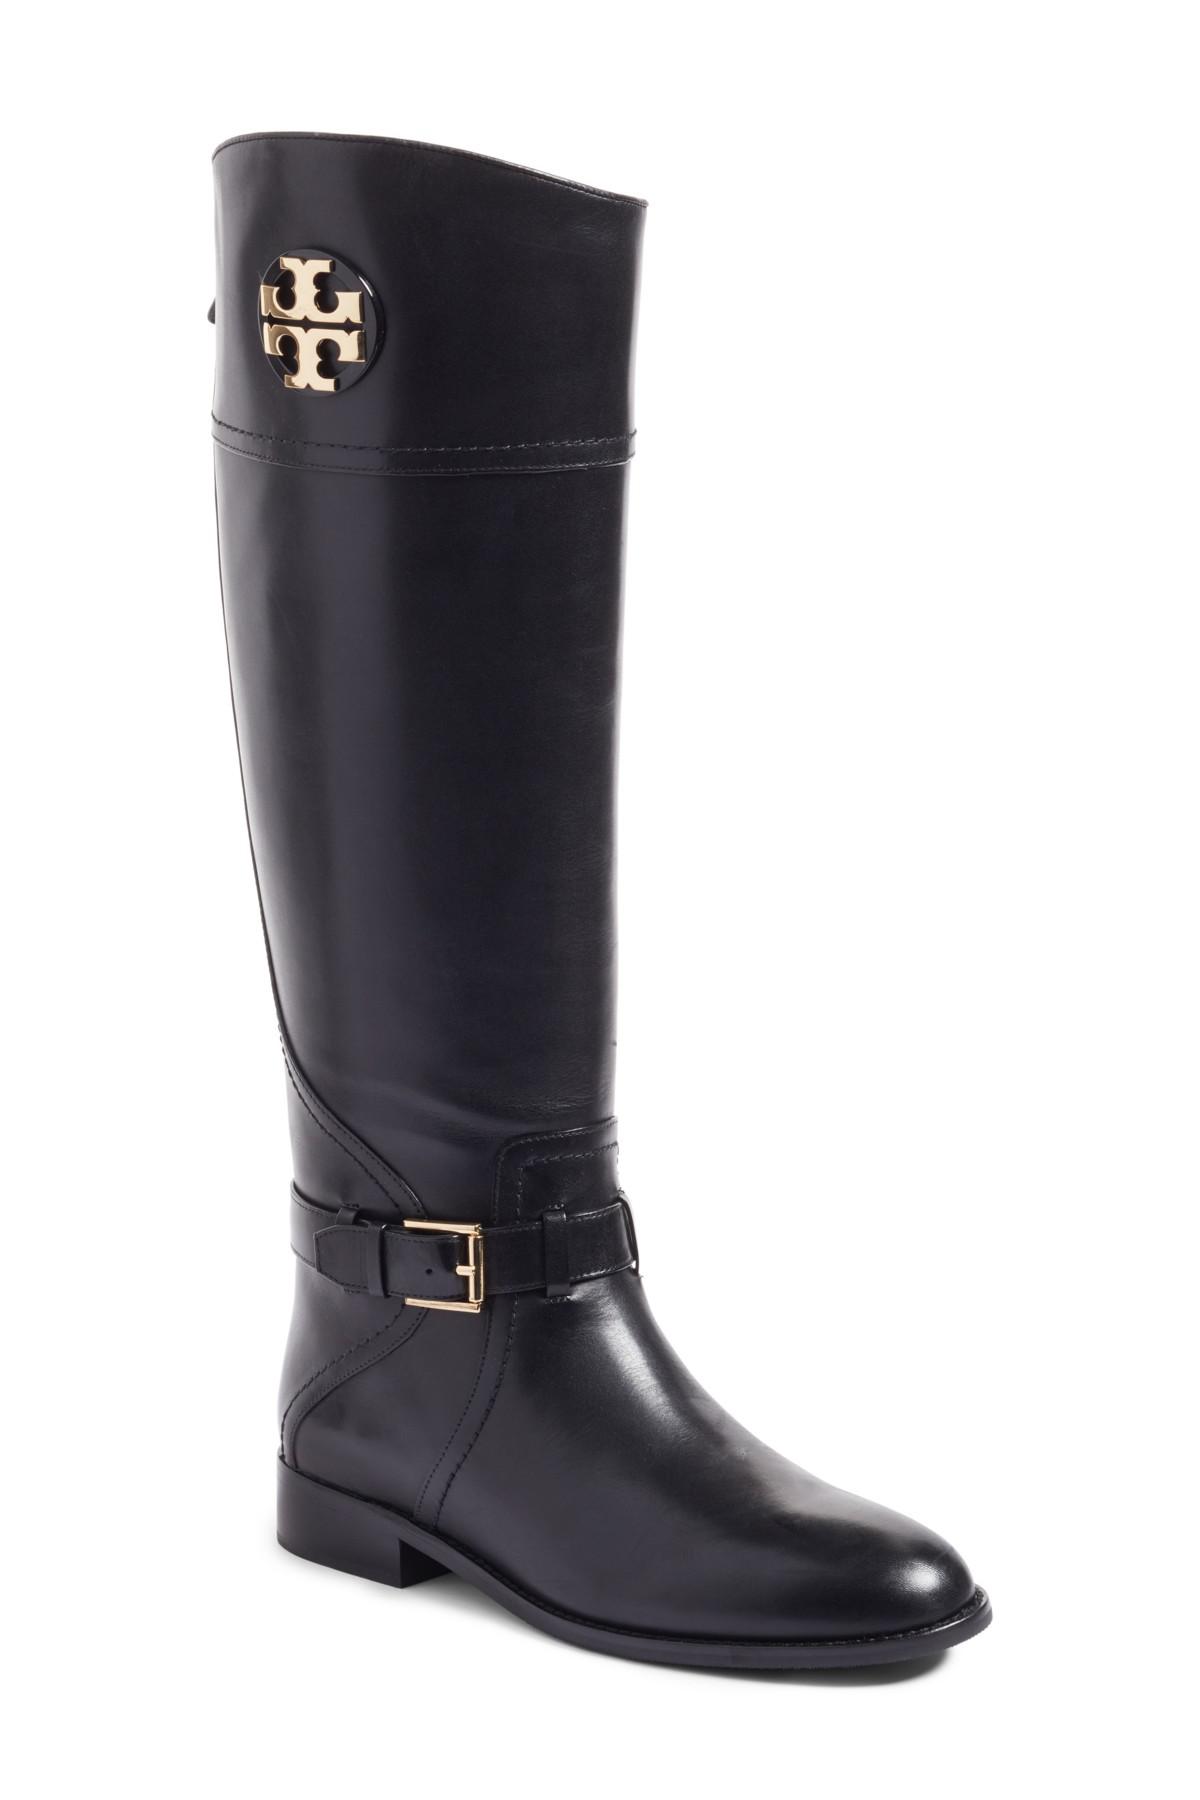 Lyst Tory Burch Adeline Boots in Black